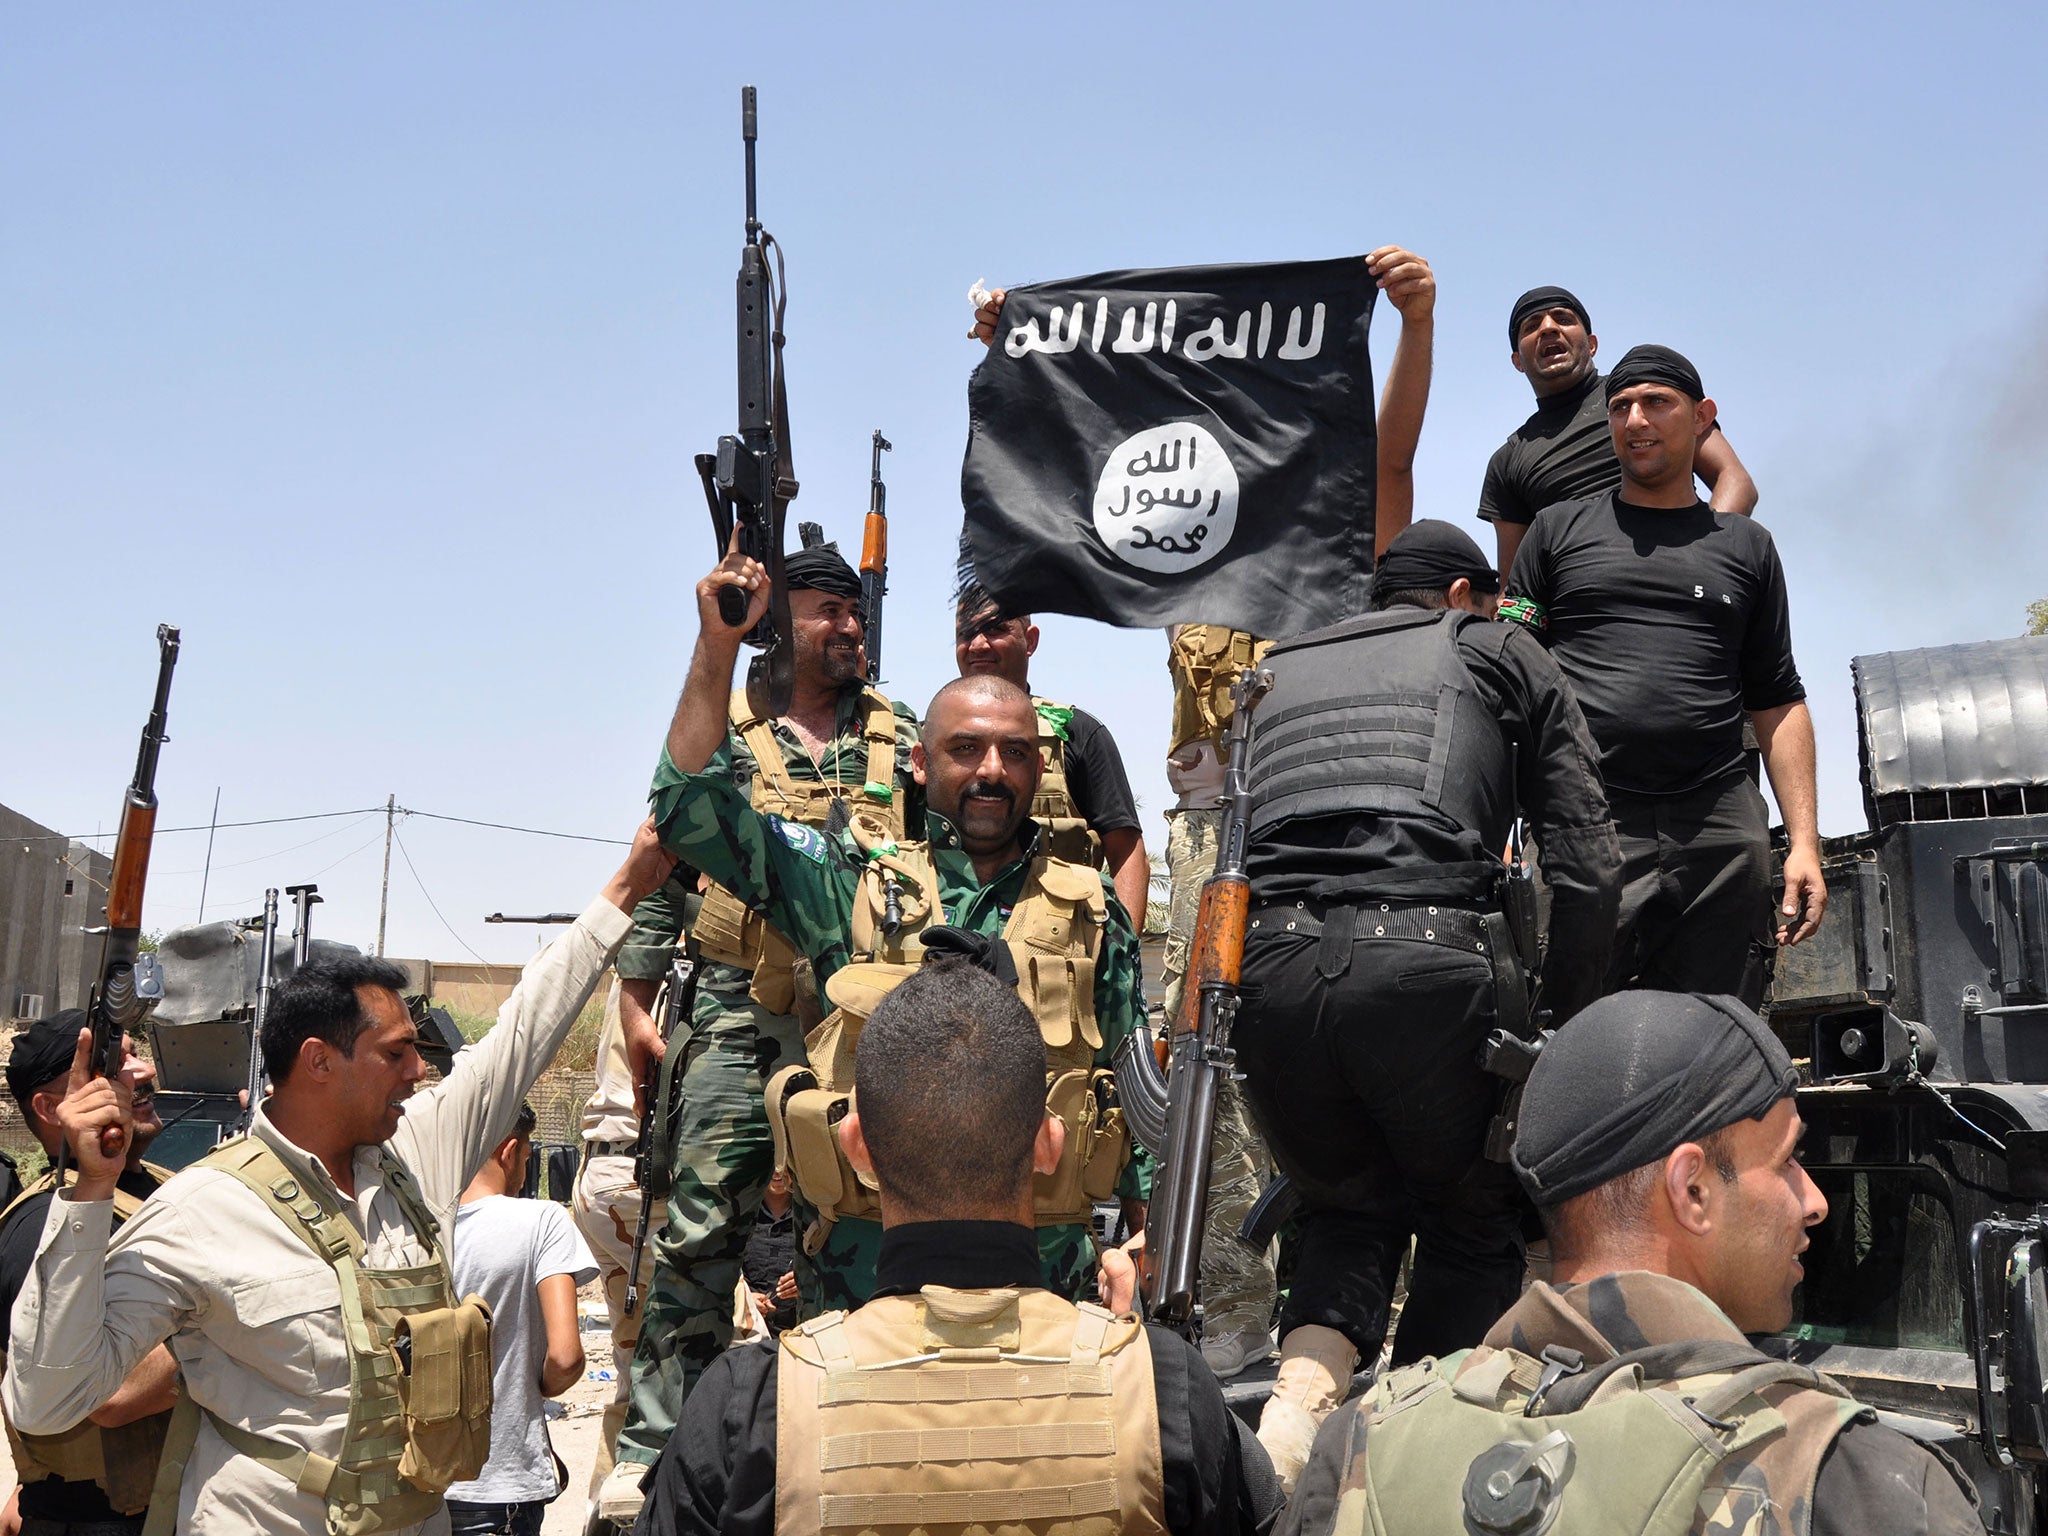 Iraqi security forces hold up a flag of the Isis group they captured during an operation to regain control of Dallah Abbas north of Baqouba, the capital of Iraq's Diyala province, 35 miles (60 kilometers) northeast of Baghdad